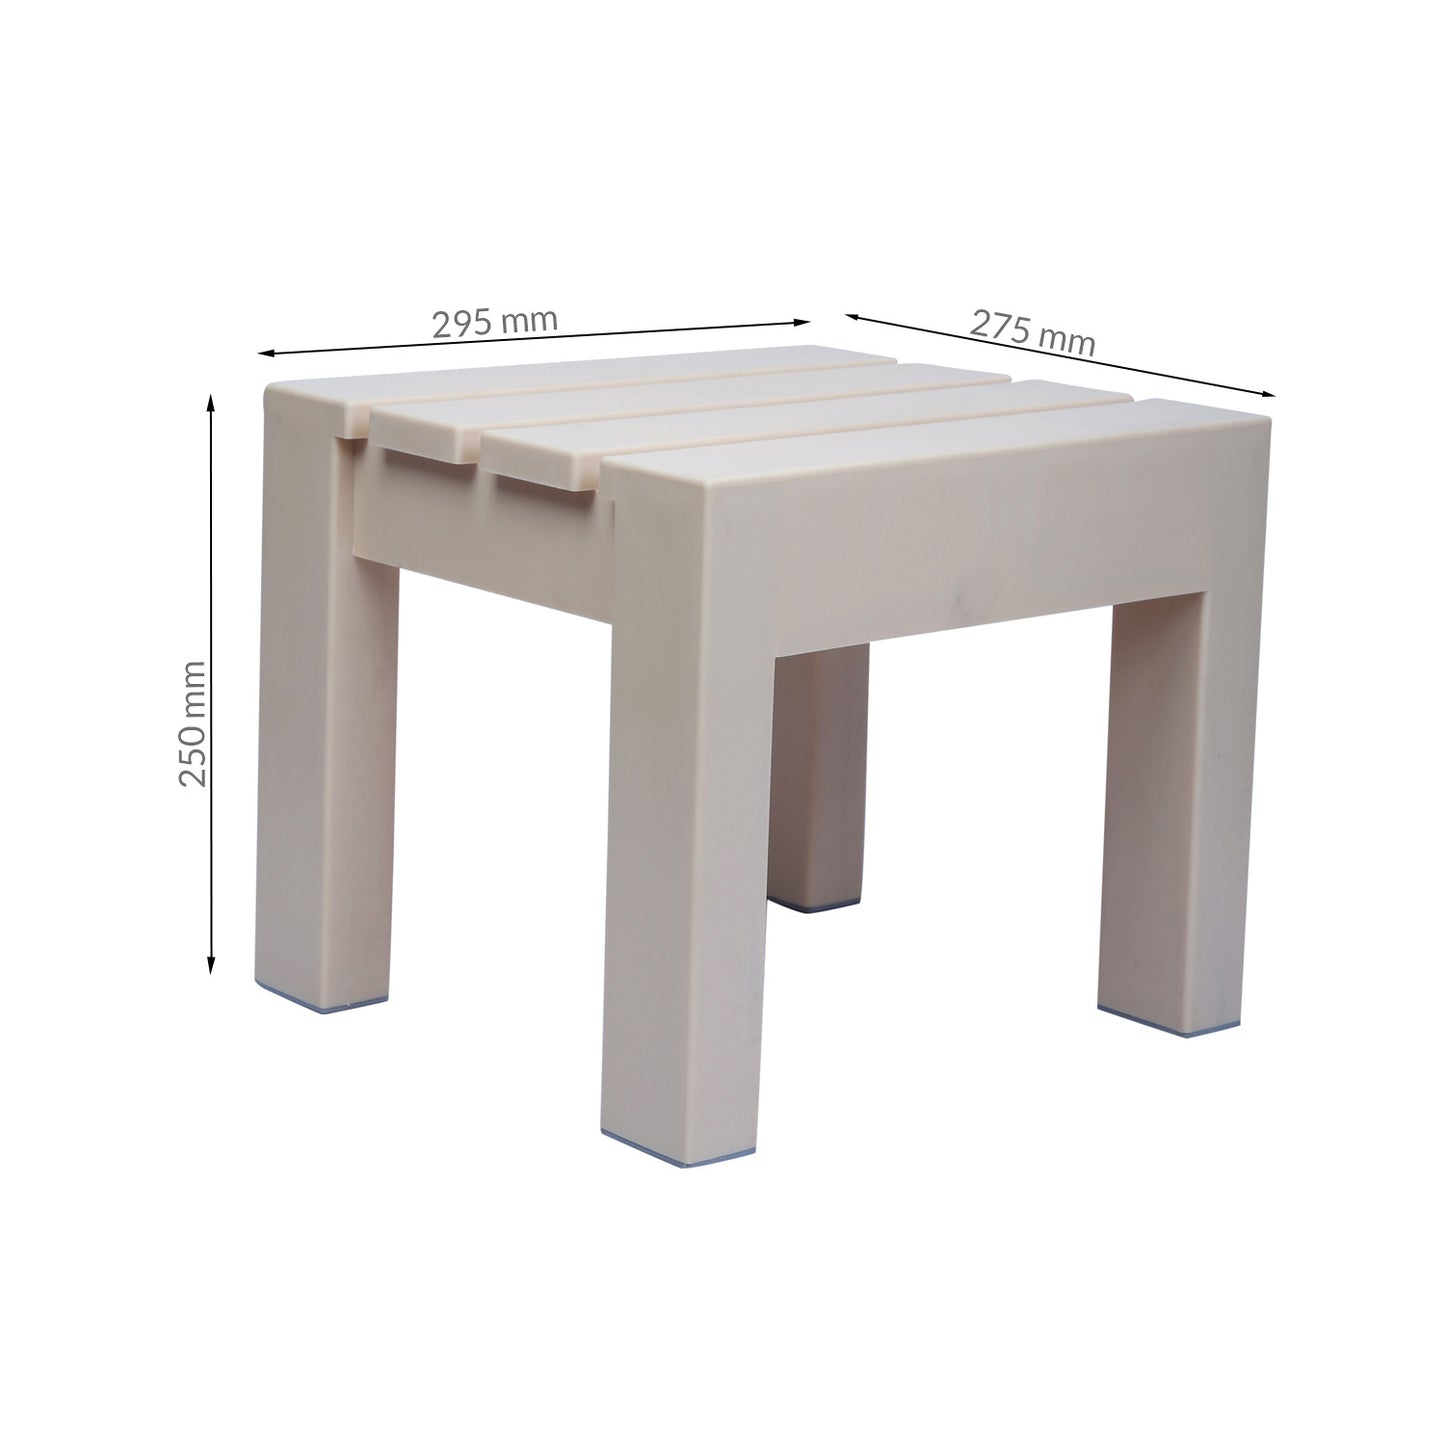 Aesthetic Square Multipurpose Bench|Furniture by Sam Home Collection